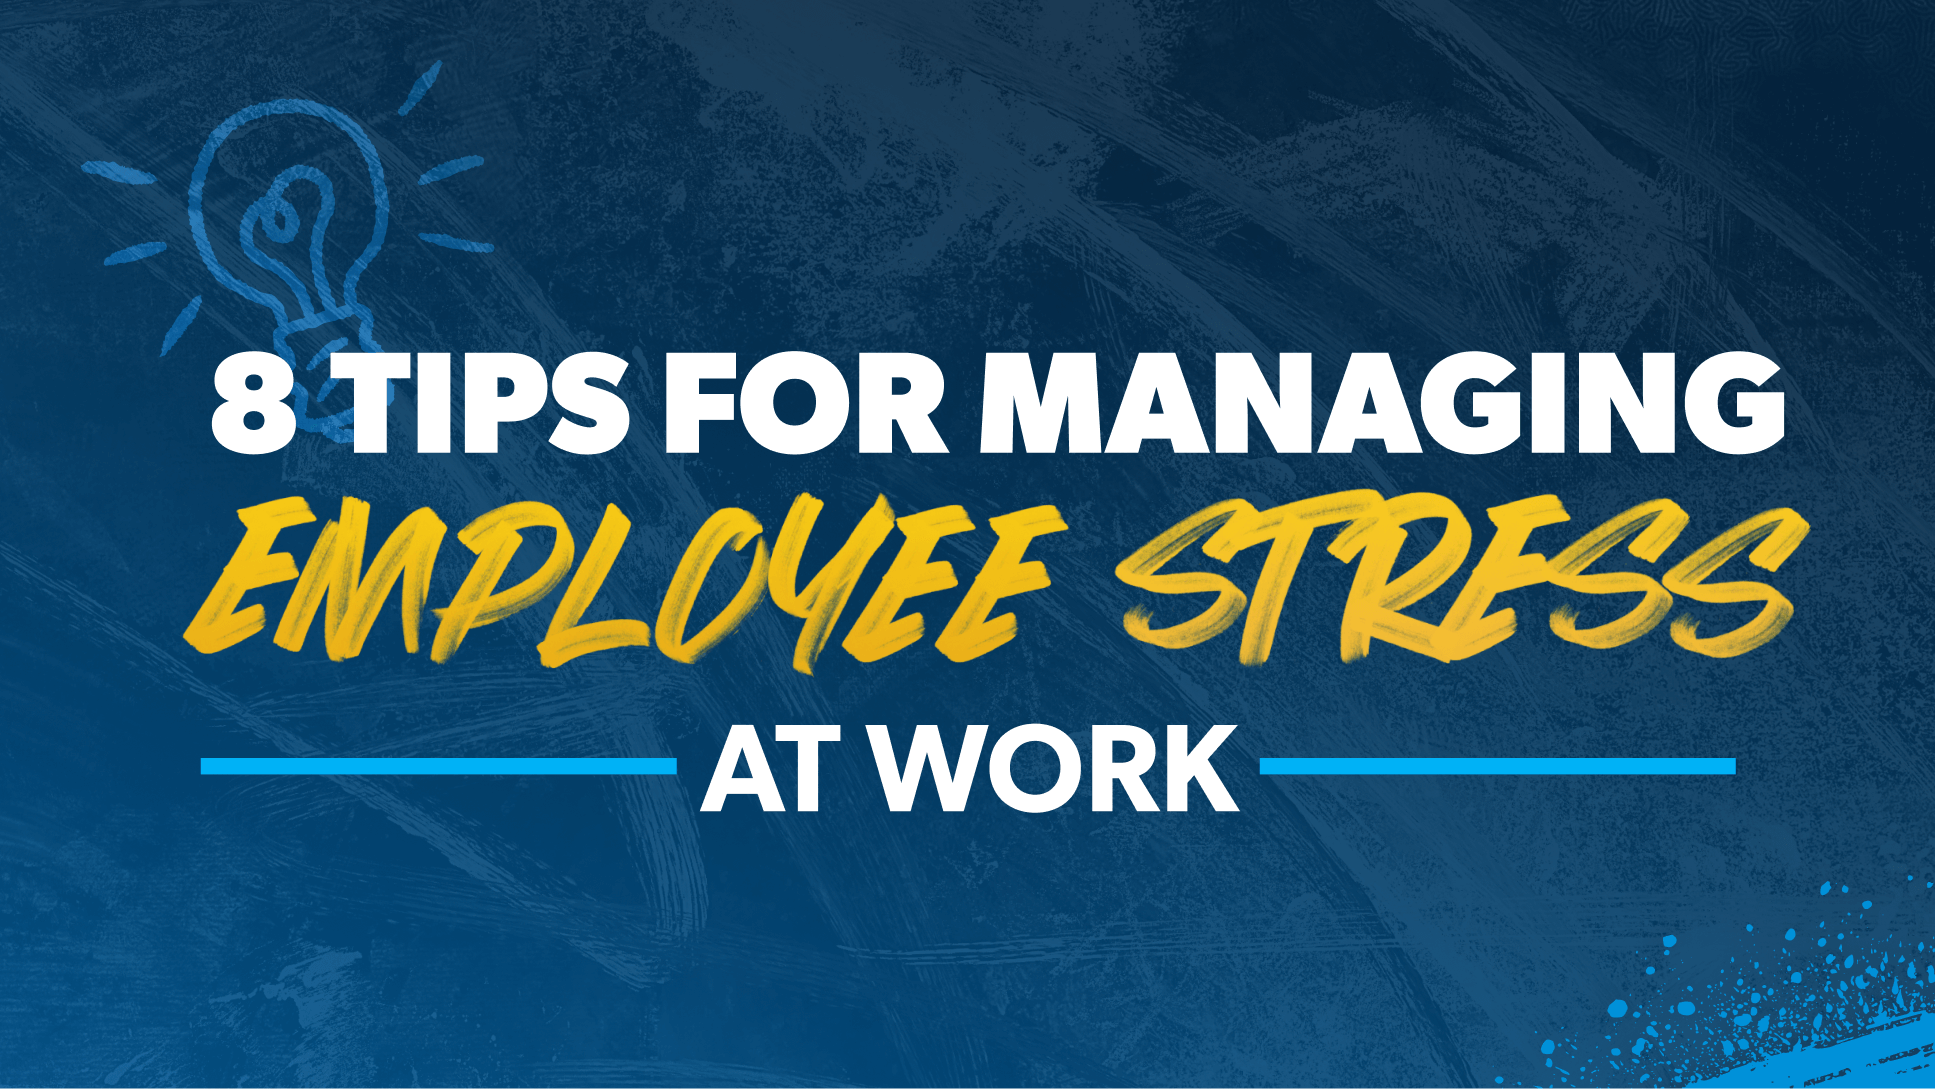 header image titled 8 tips for managing employee stress at work